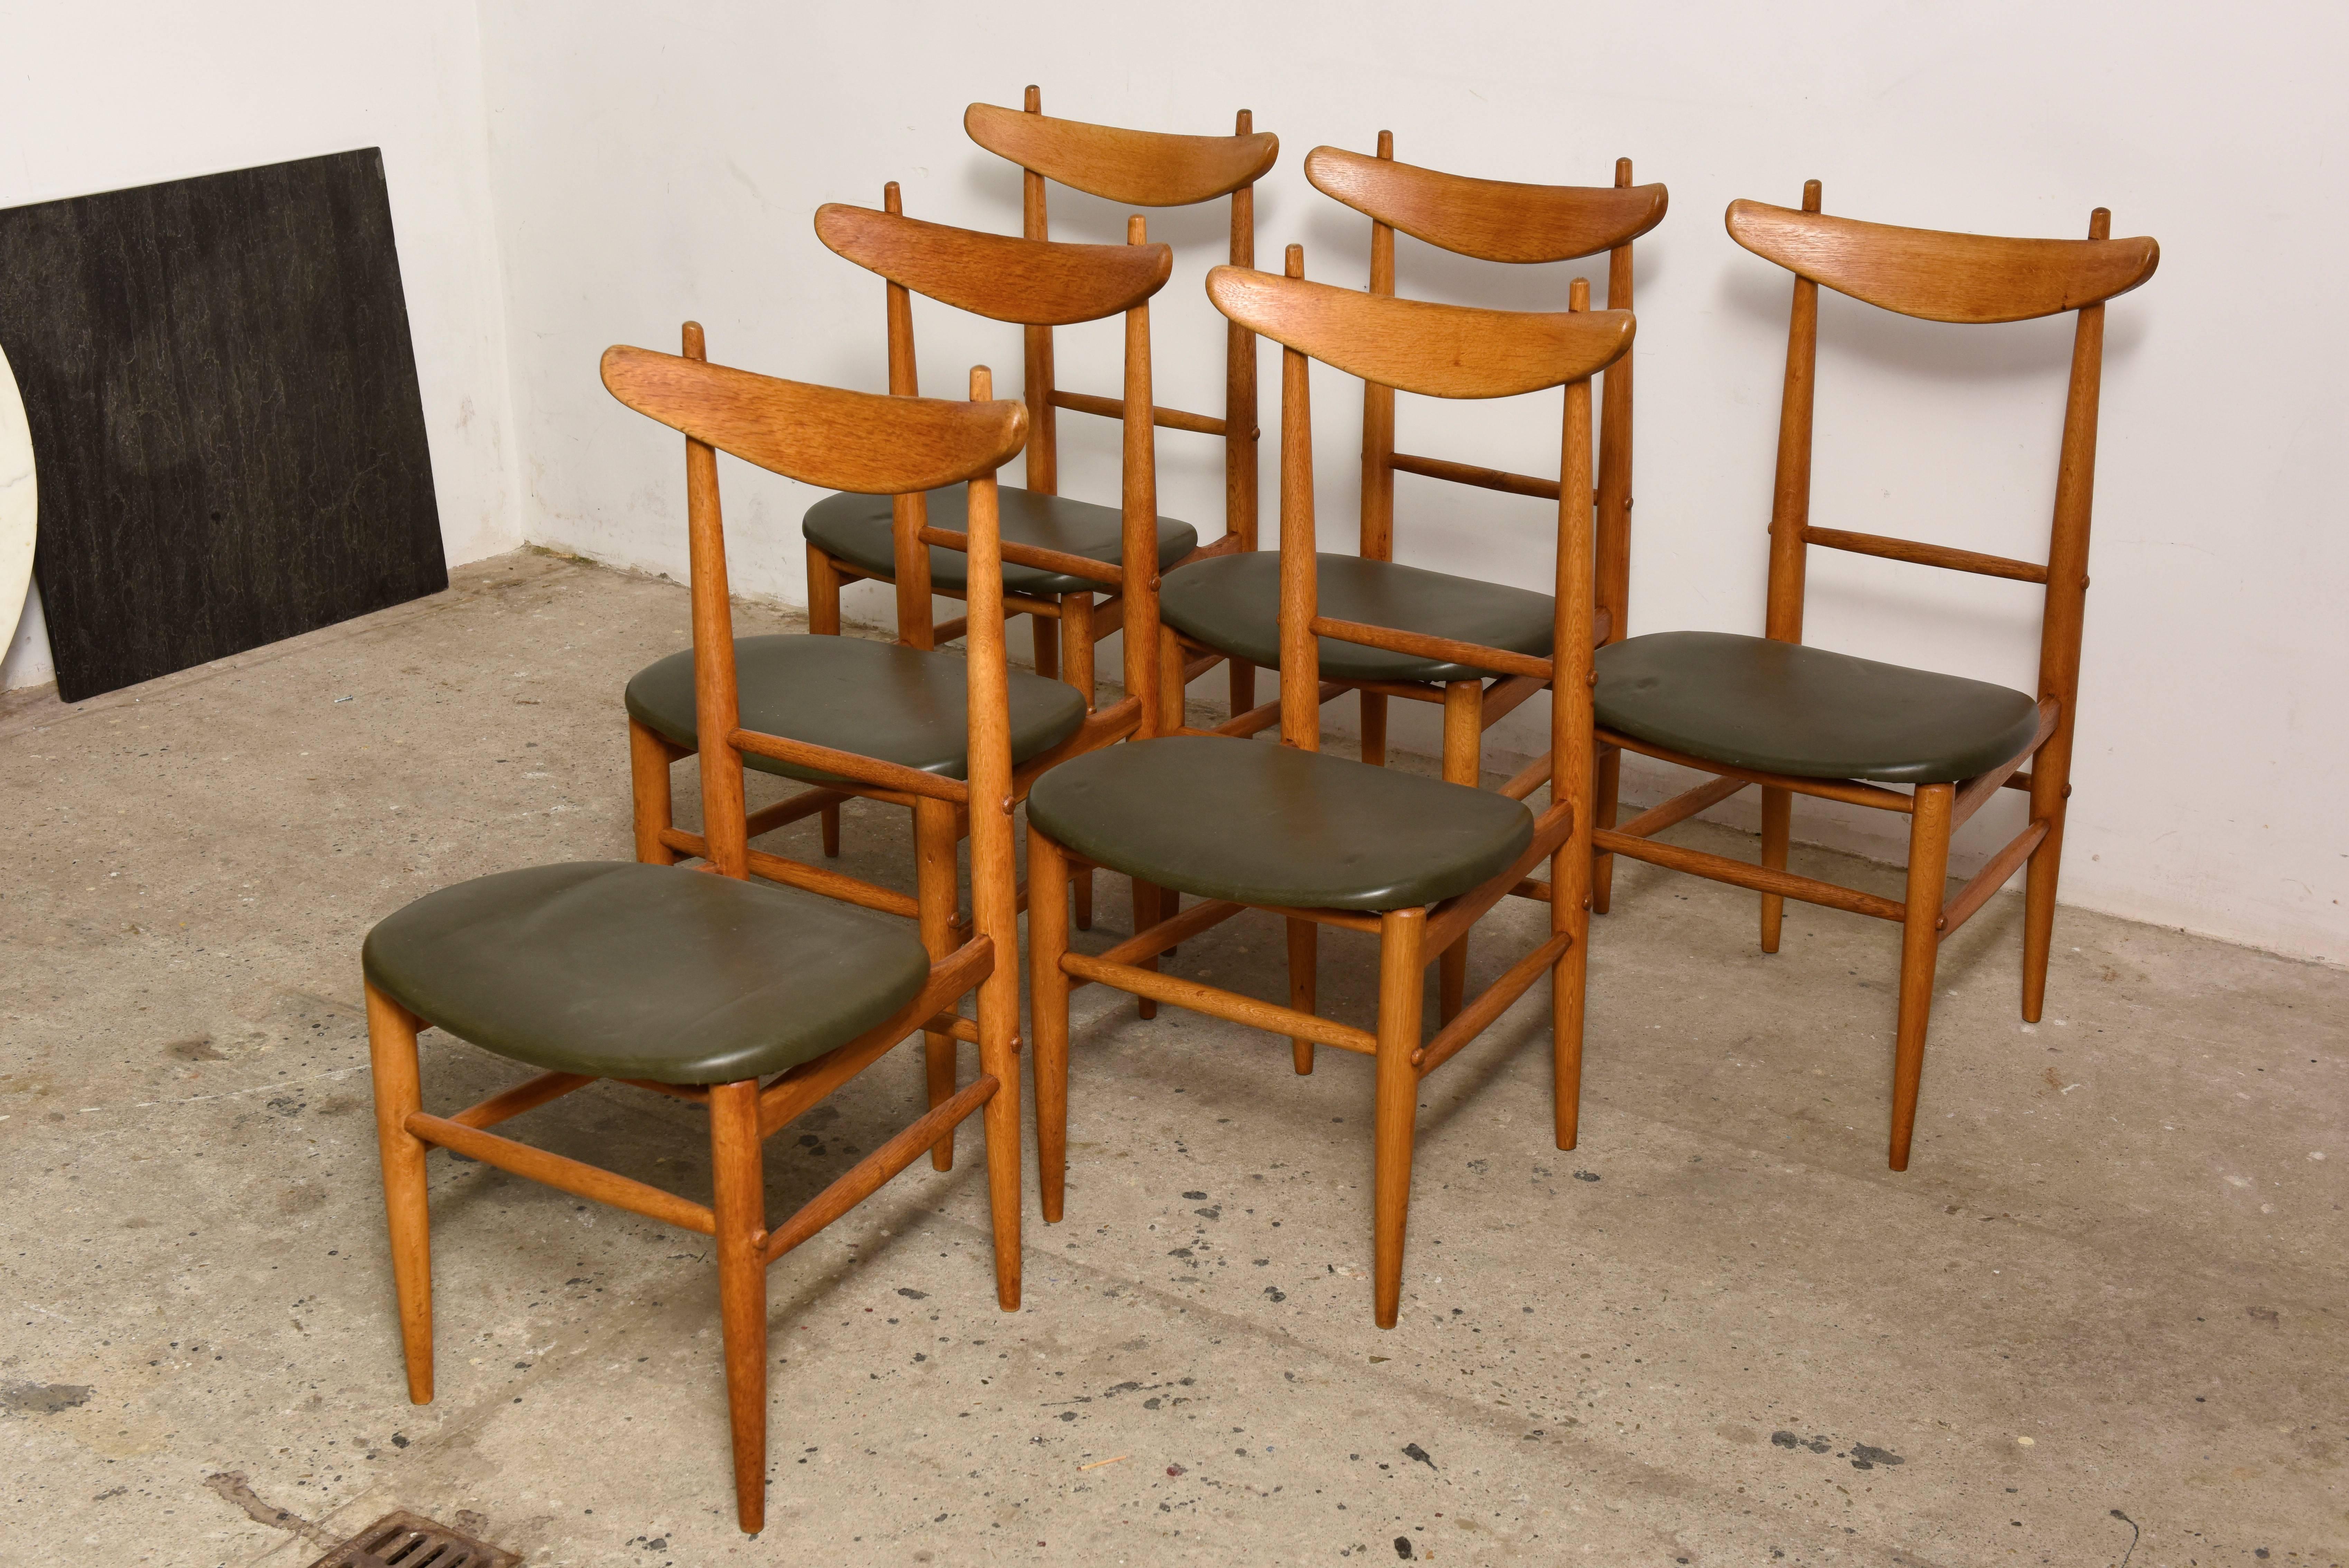 Beautiful rare set of six hand-crafted chairs in solid teak with tapered legs and a heigh backrest,early design of the Fifties.

 

With olive green leather upholstery,all in good condition.
Also available a matcing Table.